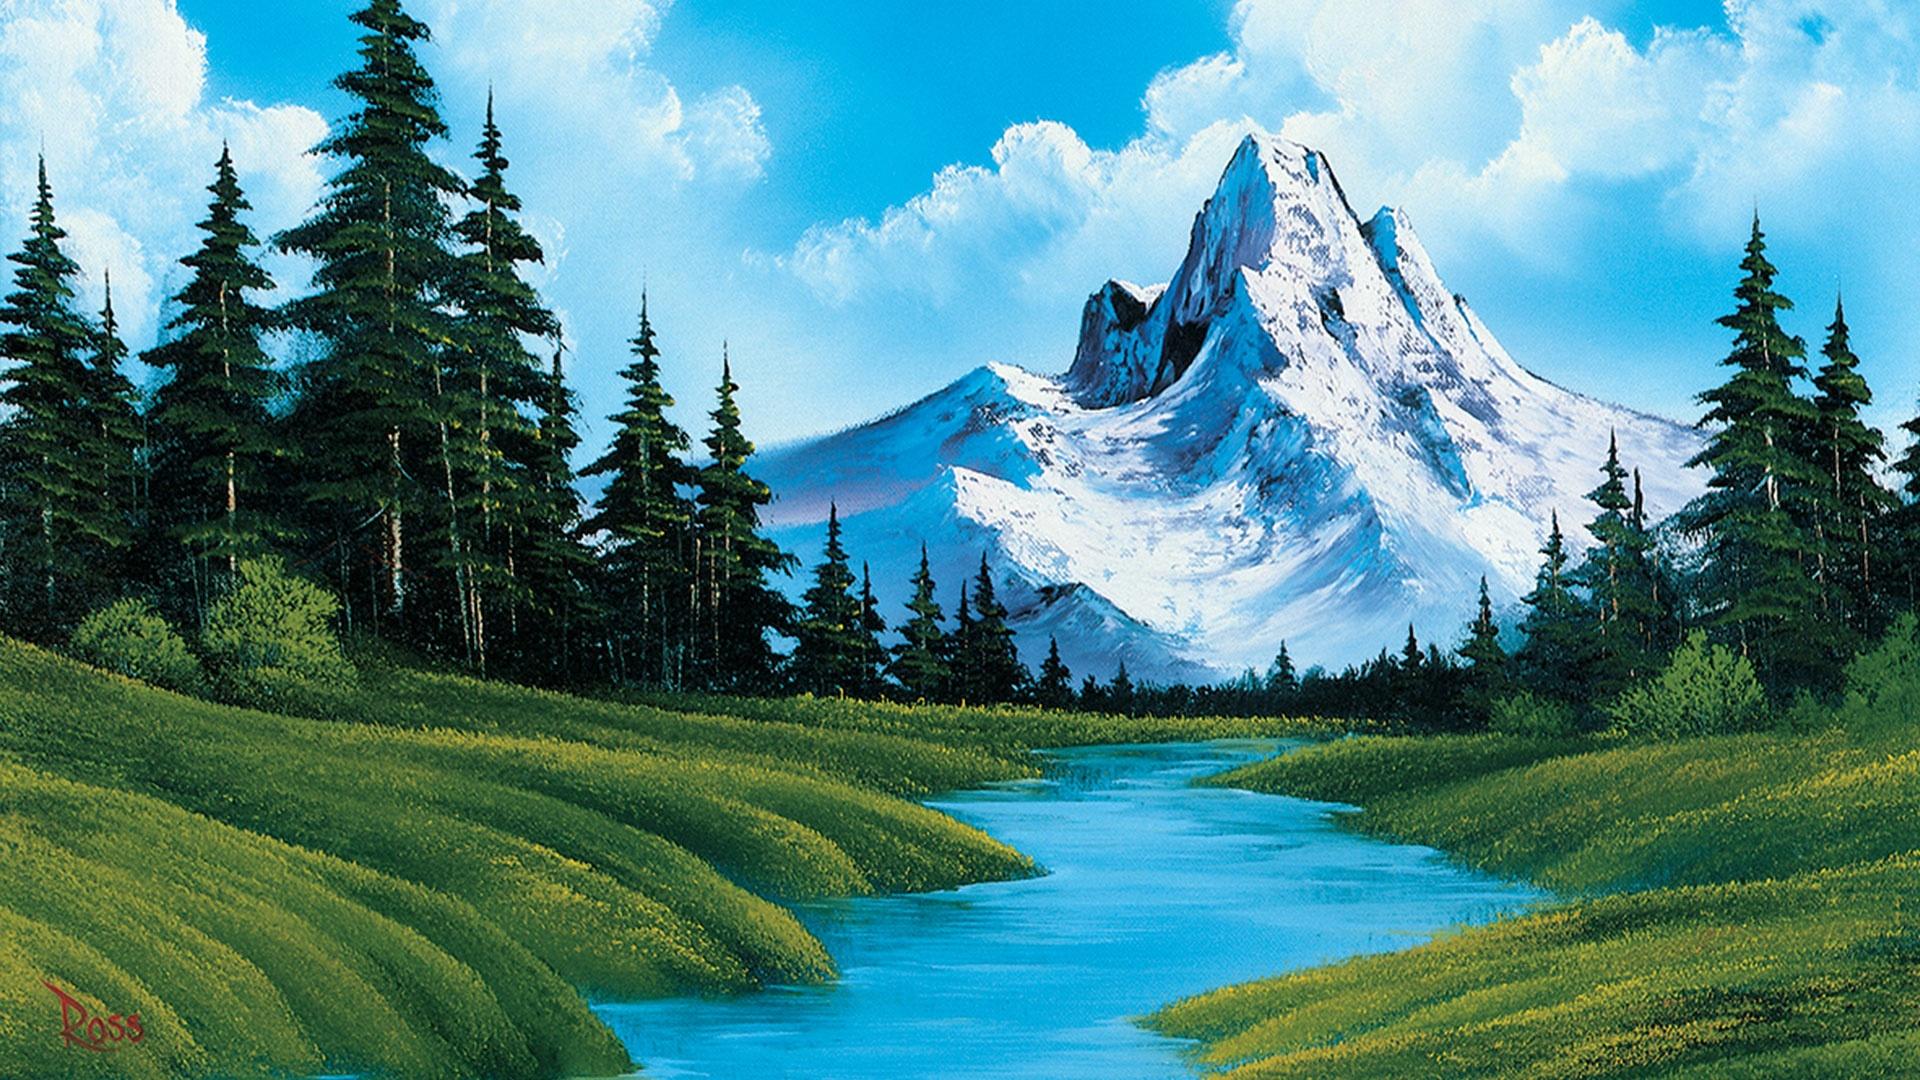 The Joy Of Painting: Gifts To Delight Every Bob Ross Fan - Little Day Out